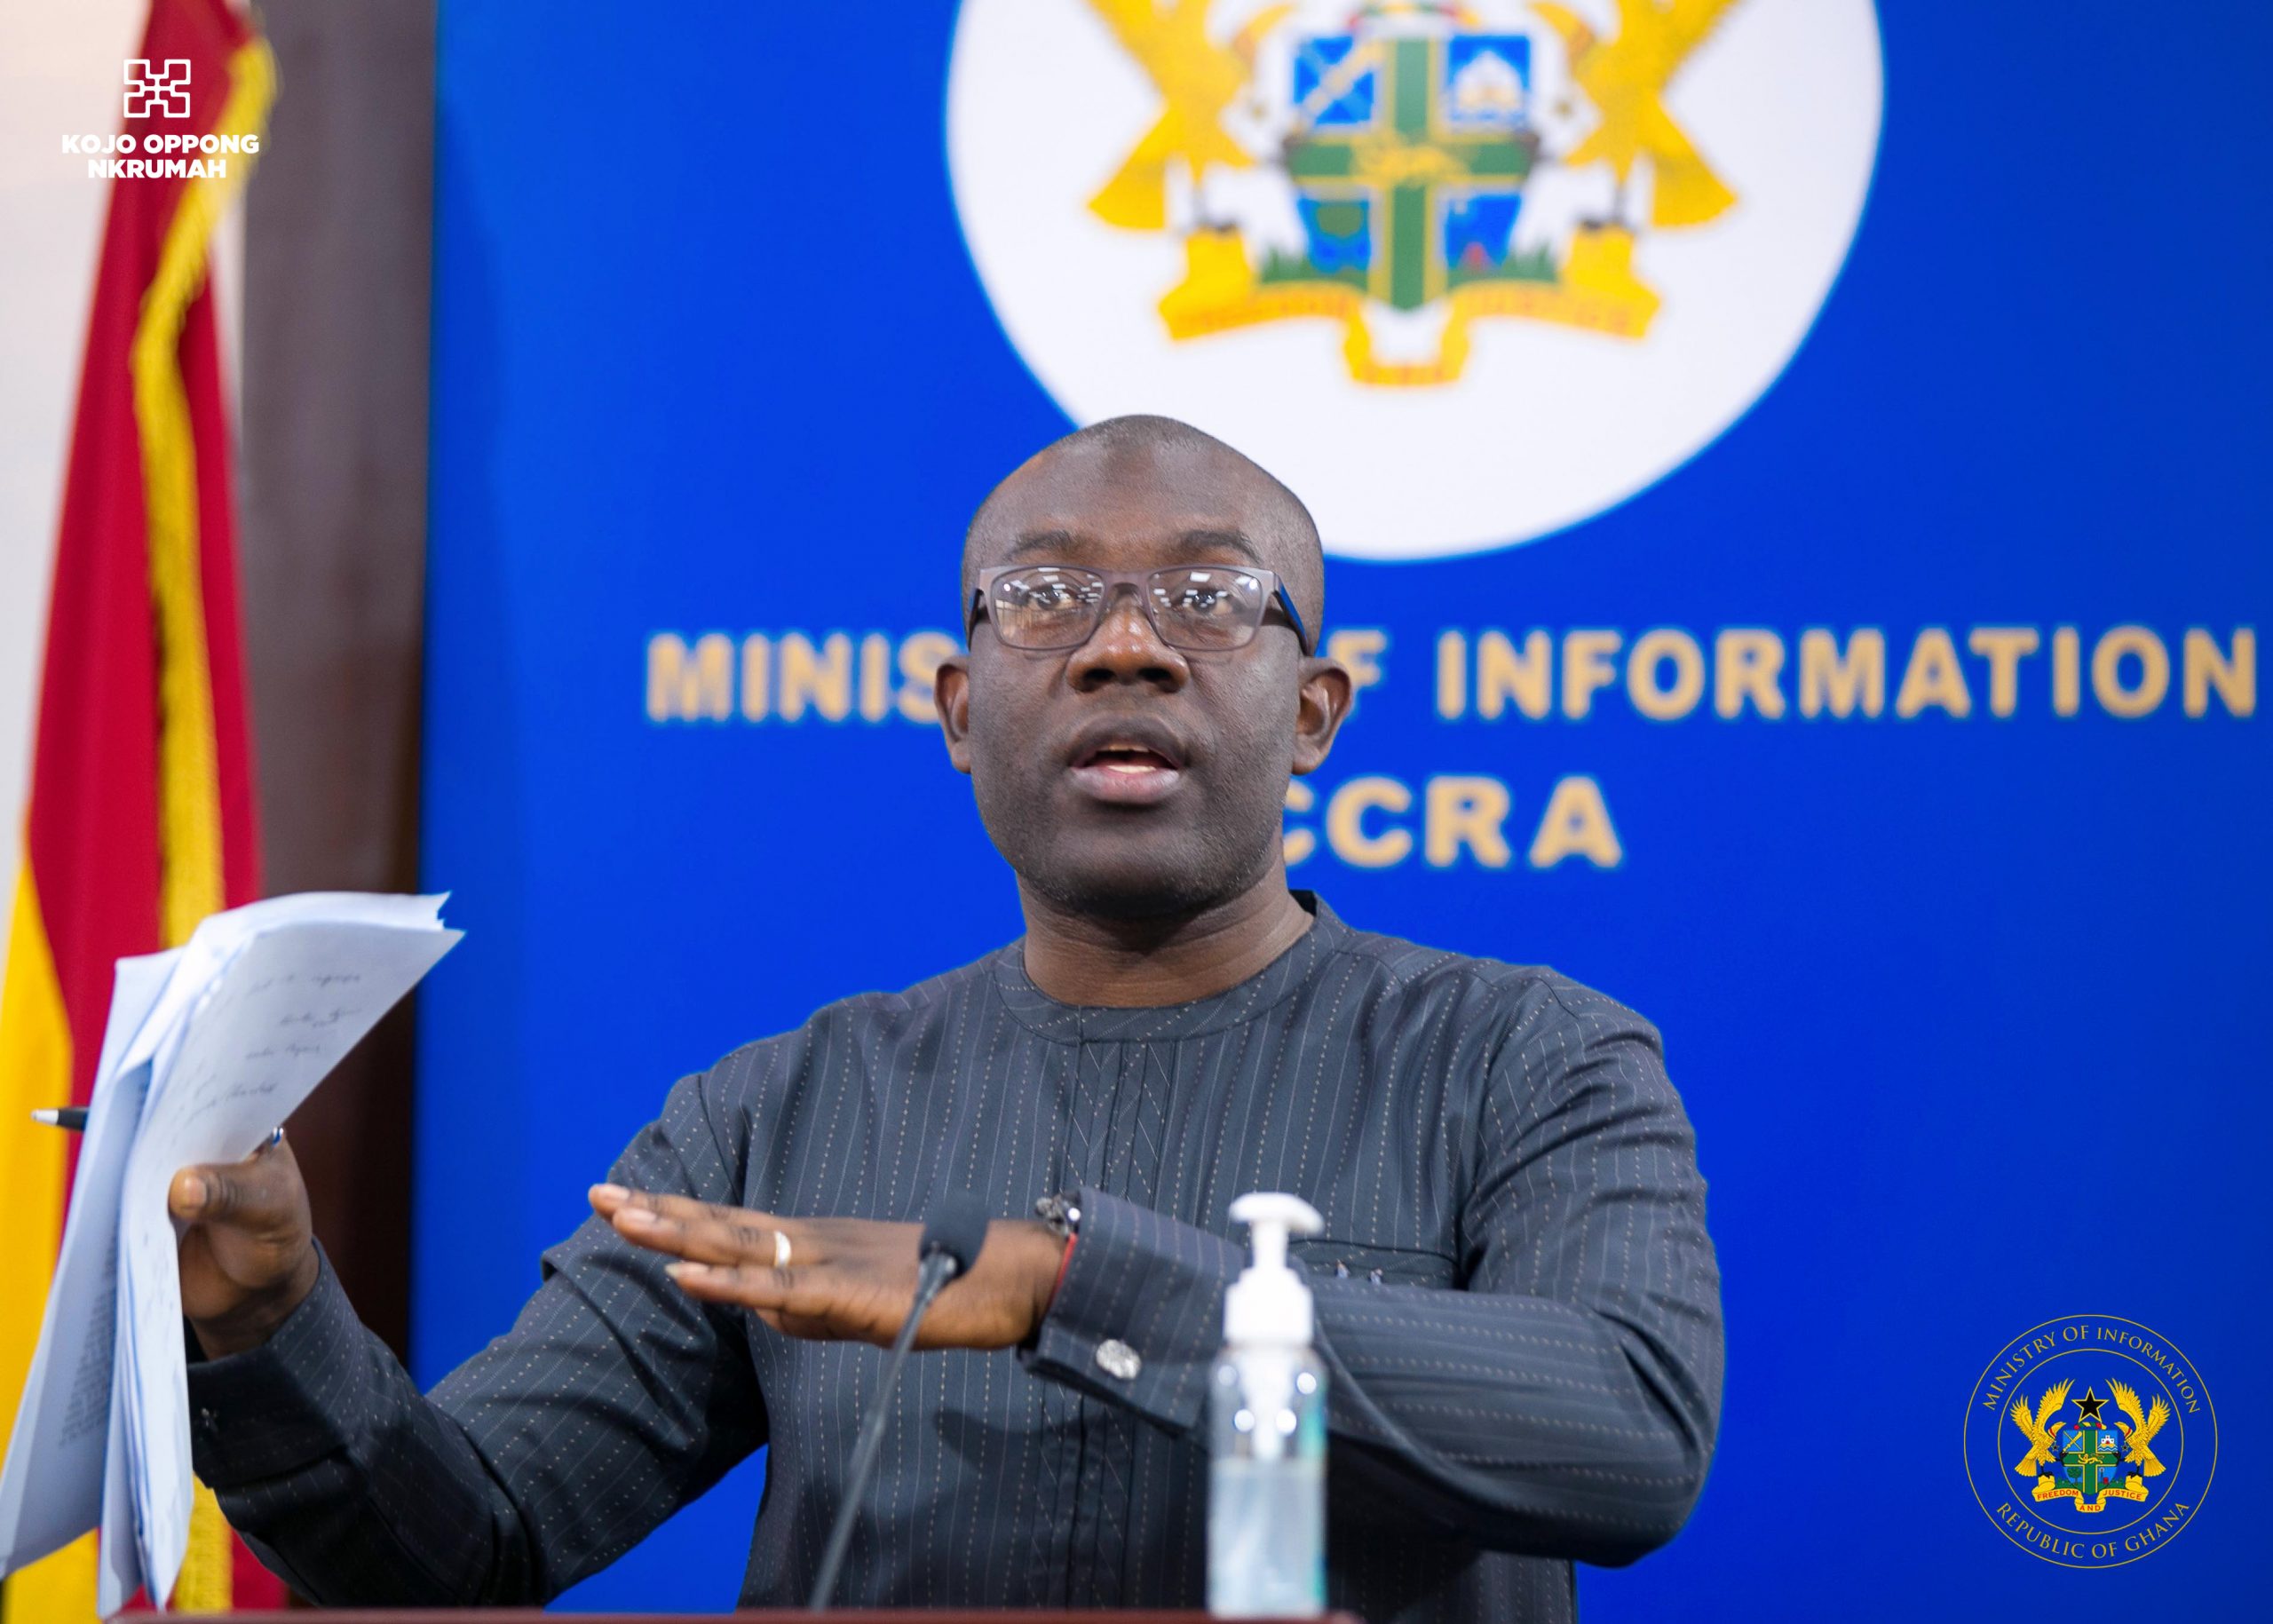 The inconsistencies in Mahama’s petition was exposed today through Asiedu Nketia – Oppong Nkrumah